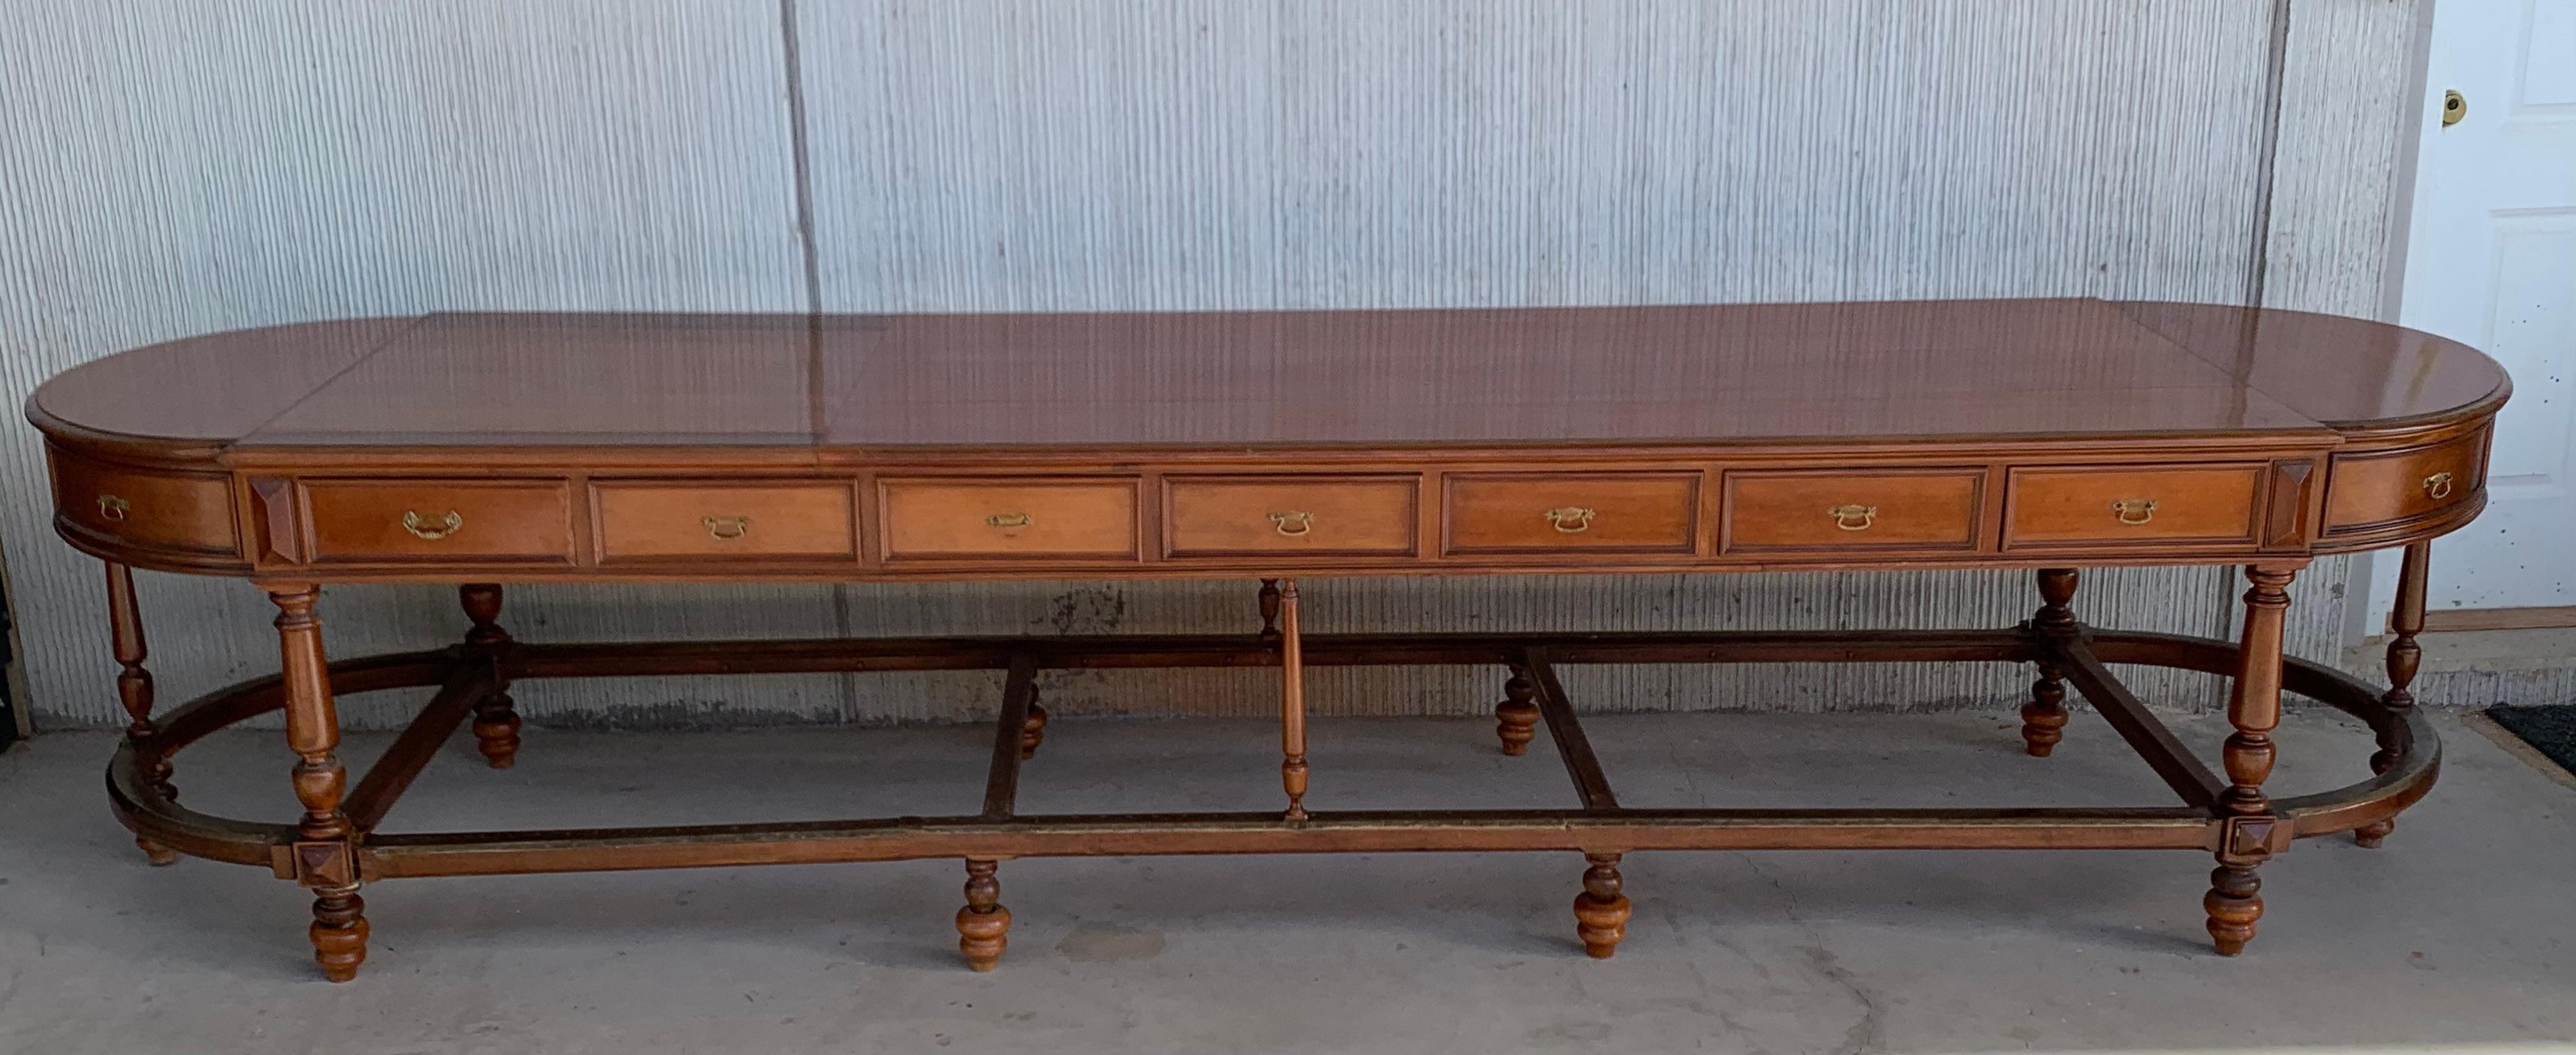 Spanish 12 foot oval center table with drawers in both sides, 20th century
Seven drawers in each side and more drawers in the oval sides
Metal reforce in the stretches.